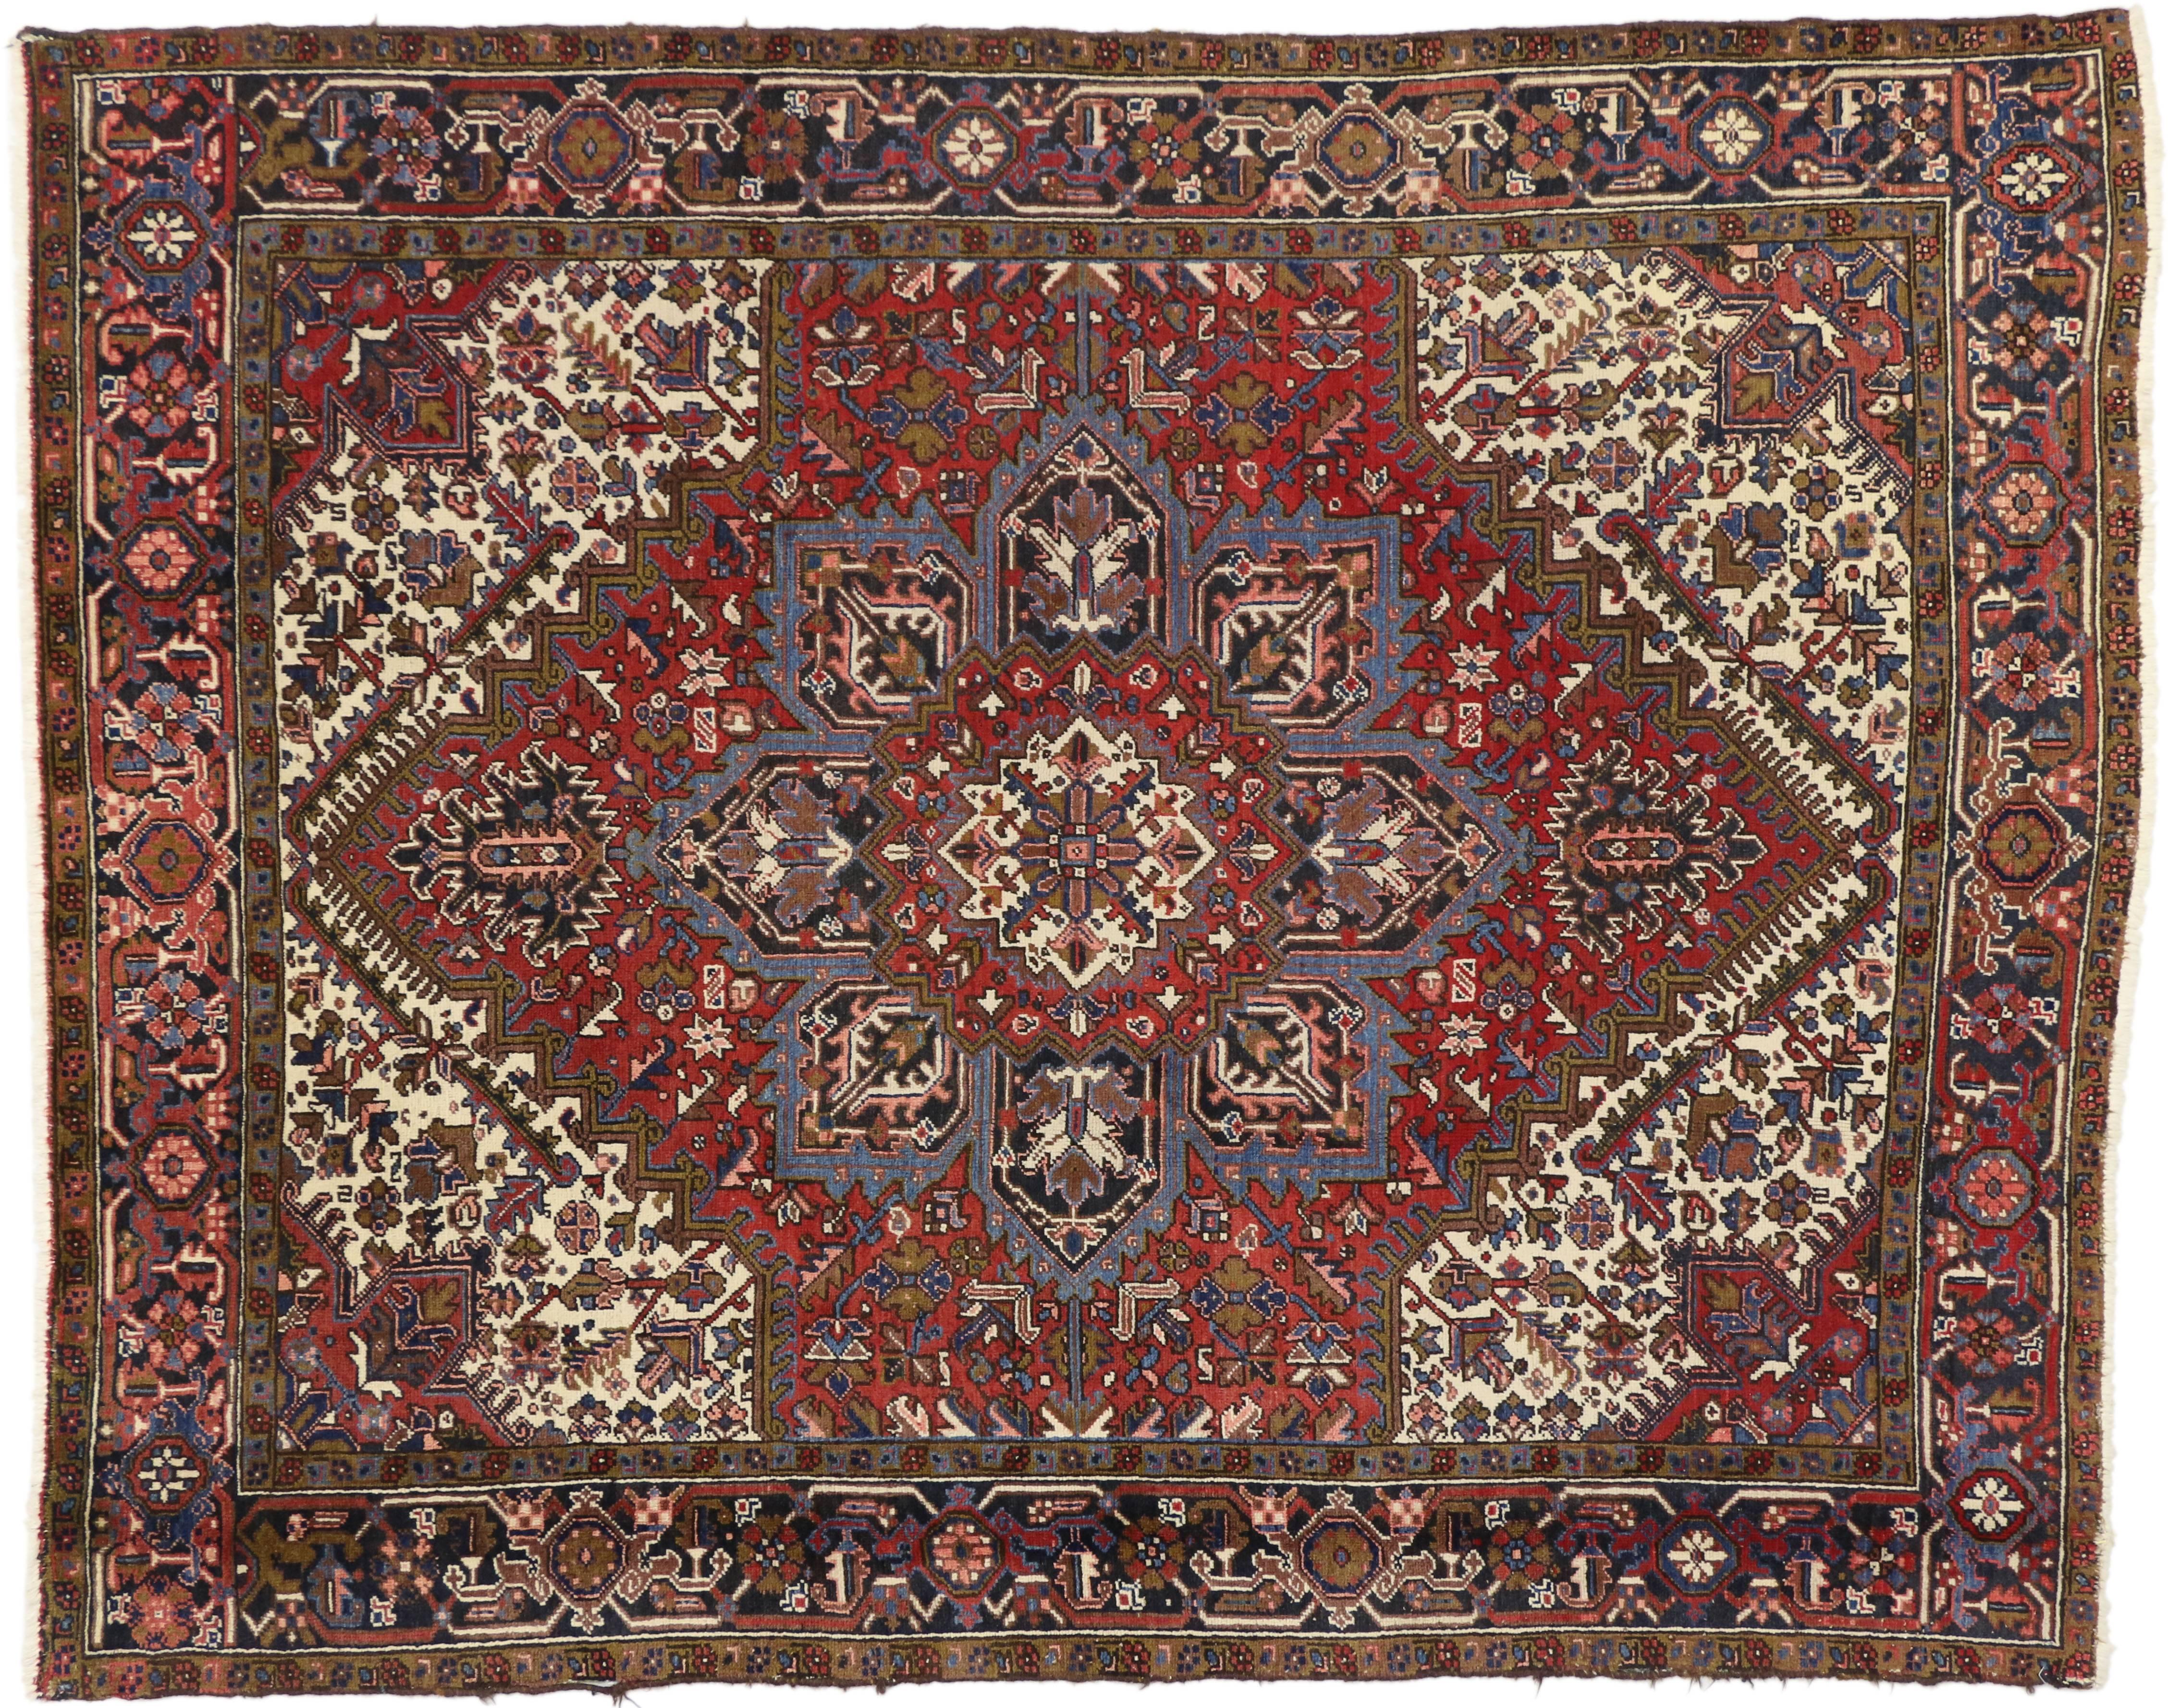 74698 Vintage Persian Heriz Rug with Mid-Century Modern Style in Traditional Colors. This vintage Persian Heriz rug features a Mid-Century Modern style in traditional colors. Rendered in red, navy, blue, and ivory with accents of brown. This vintage